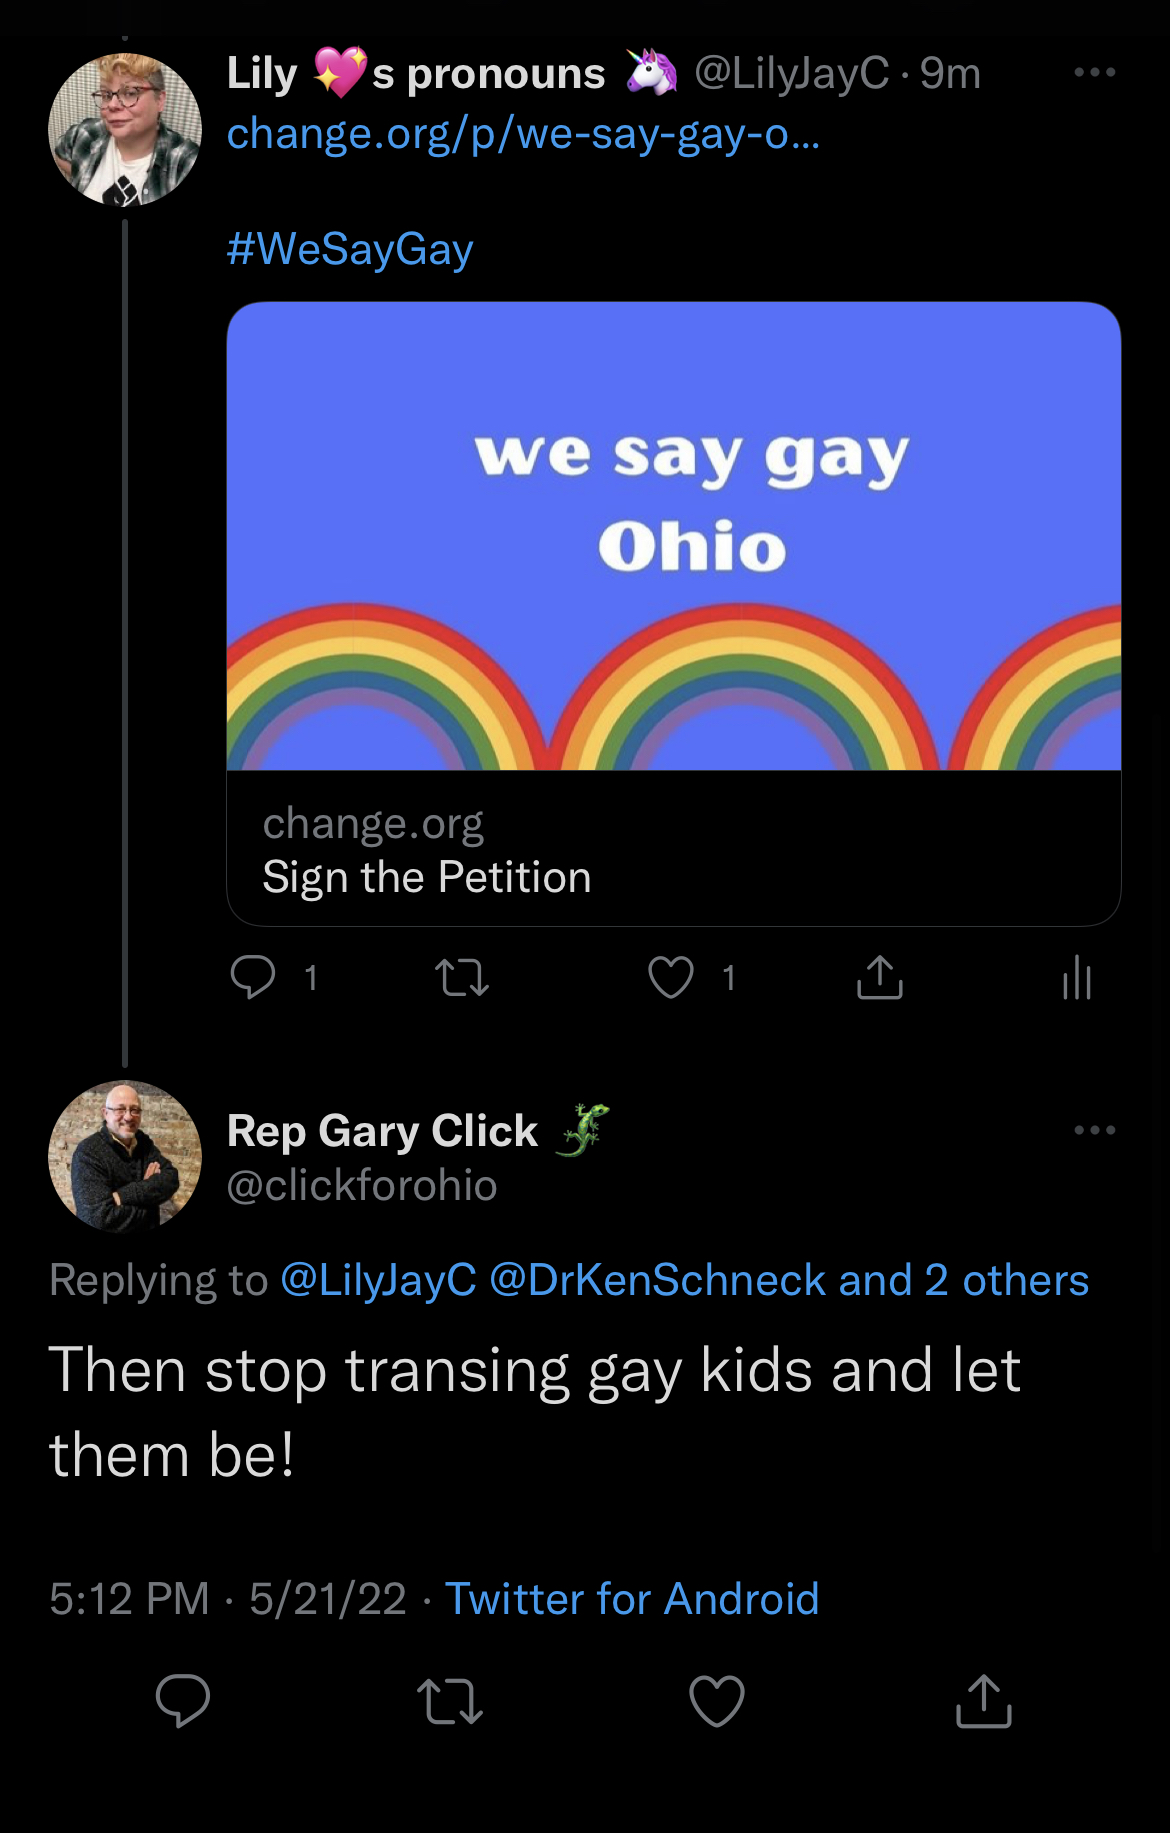 Image of the first day State Rep Gary Click began bullying me on Twitter last may. He's telling me to "stop transing gay kids and let them be!"